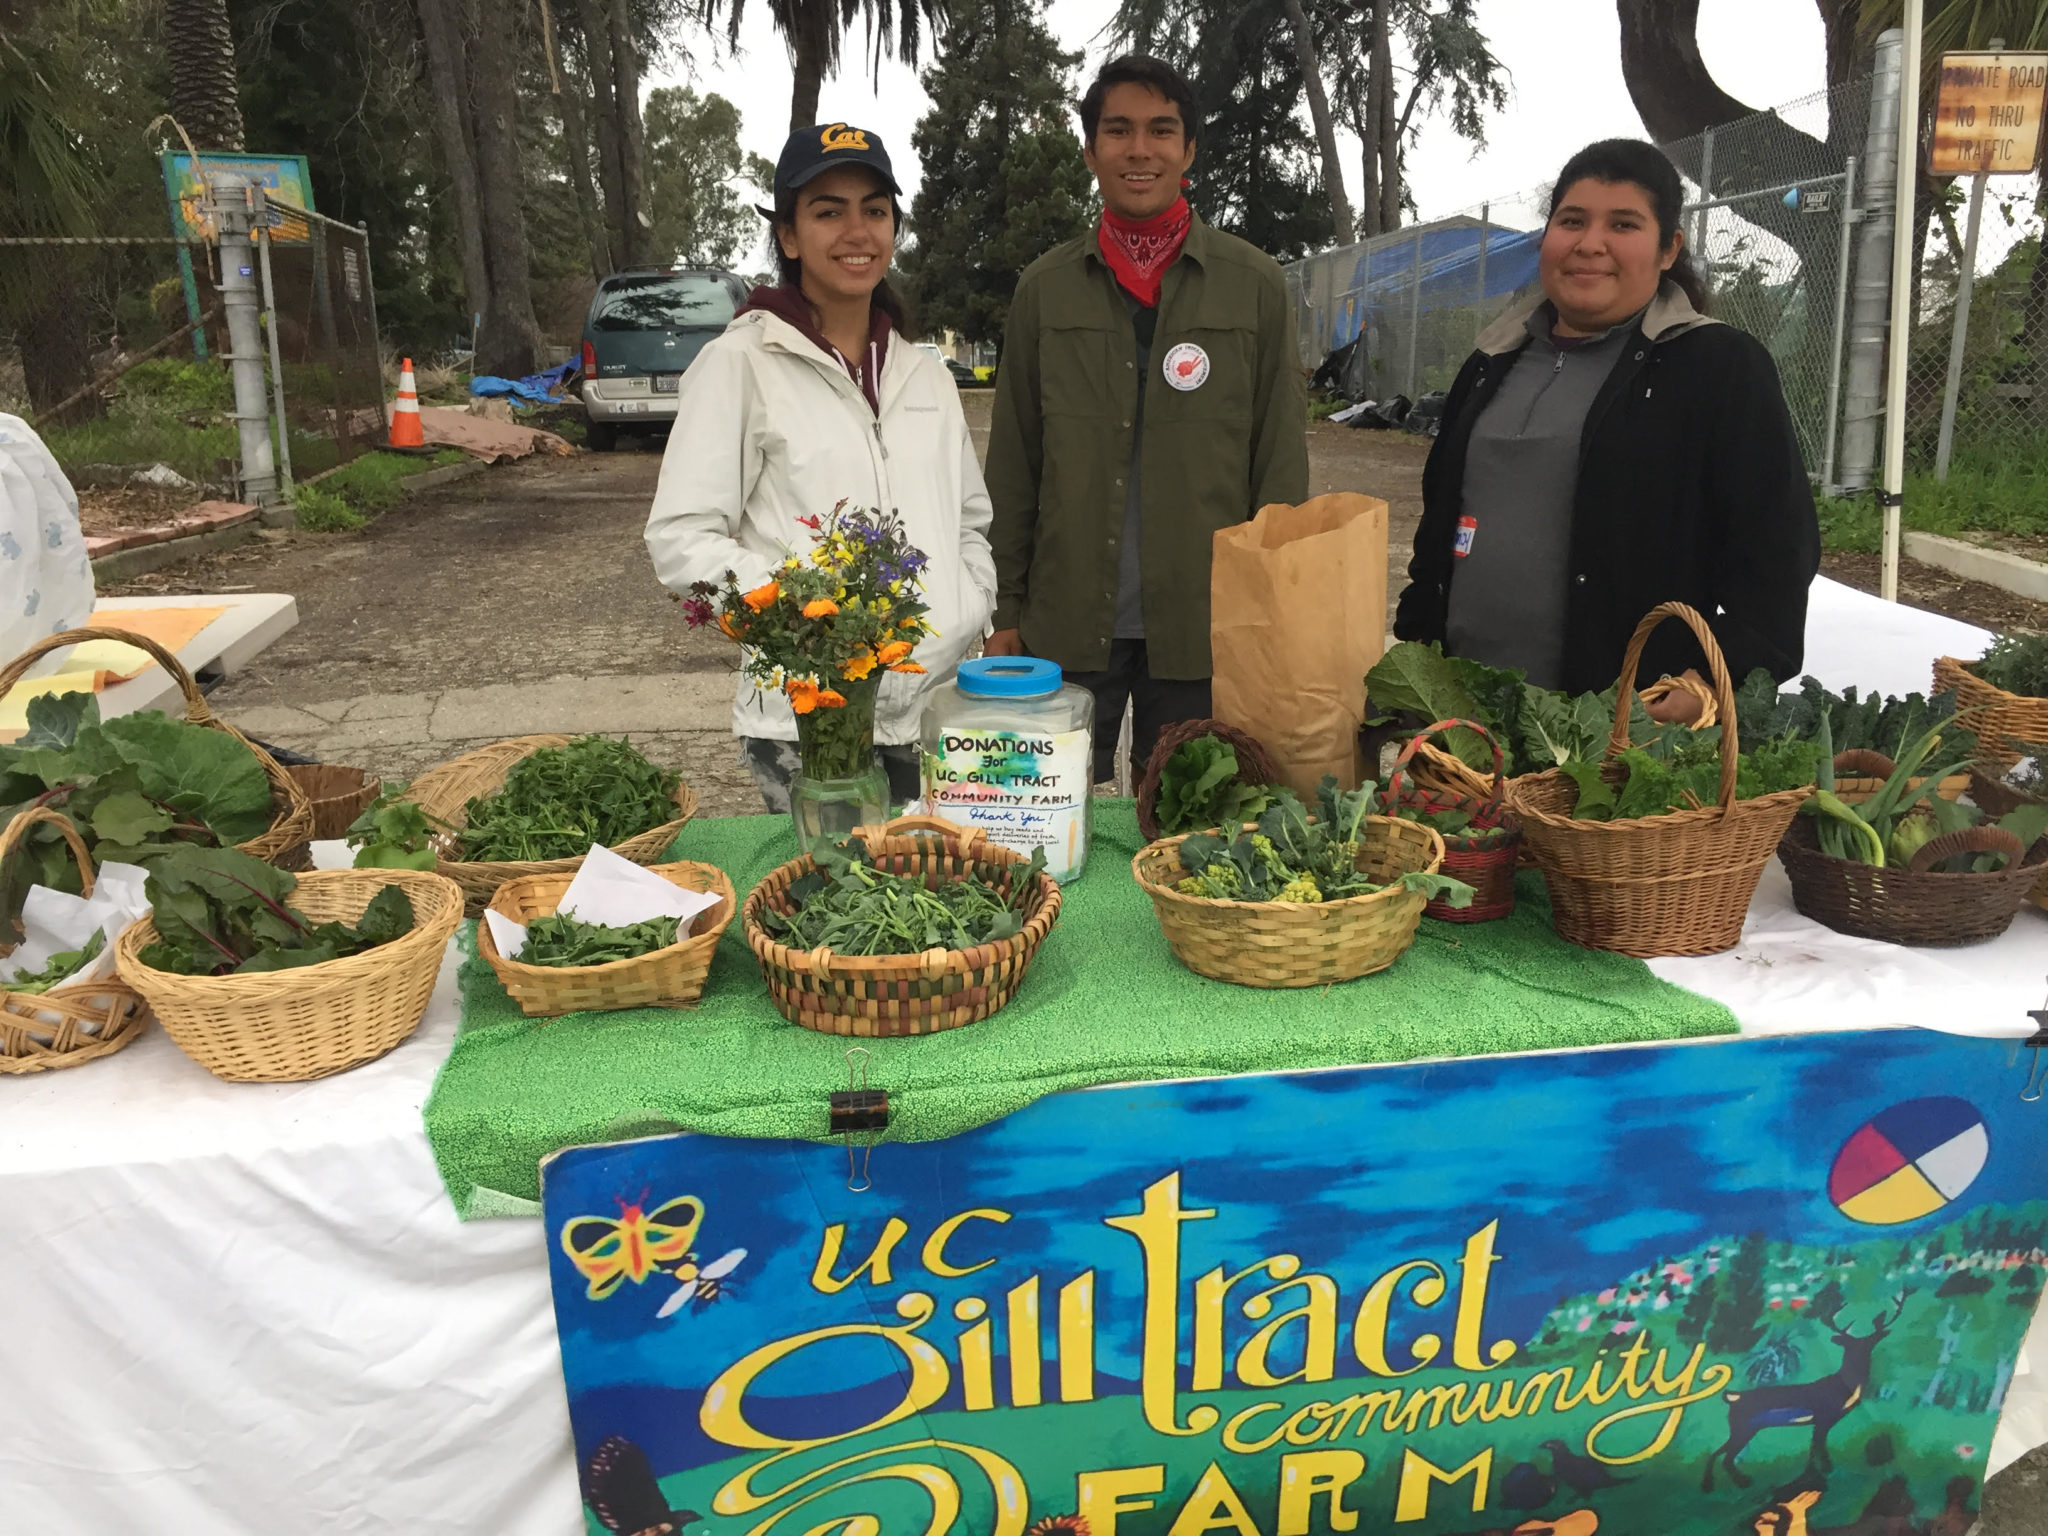 UC Gill Tract Community Farm Stand.